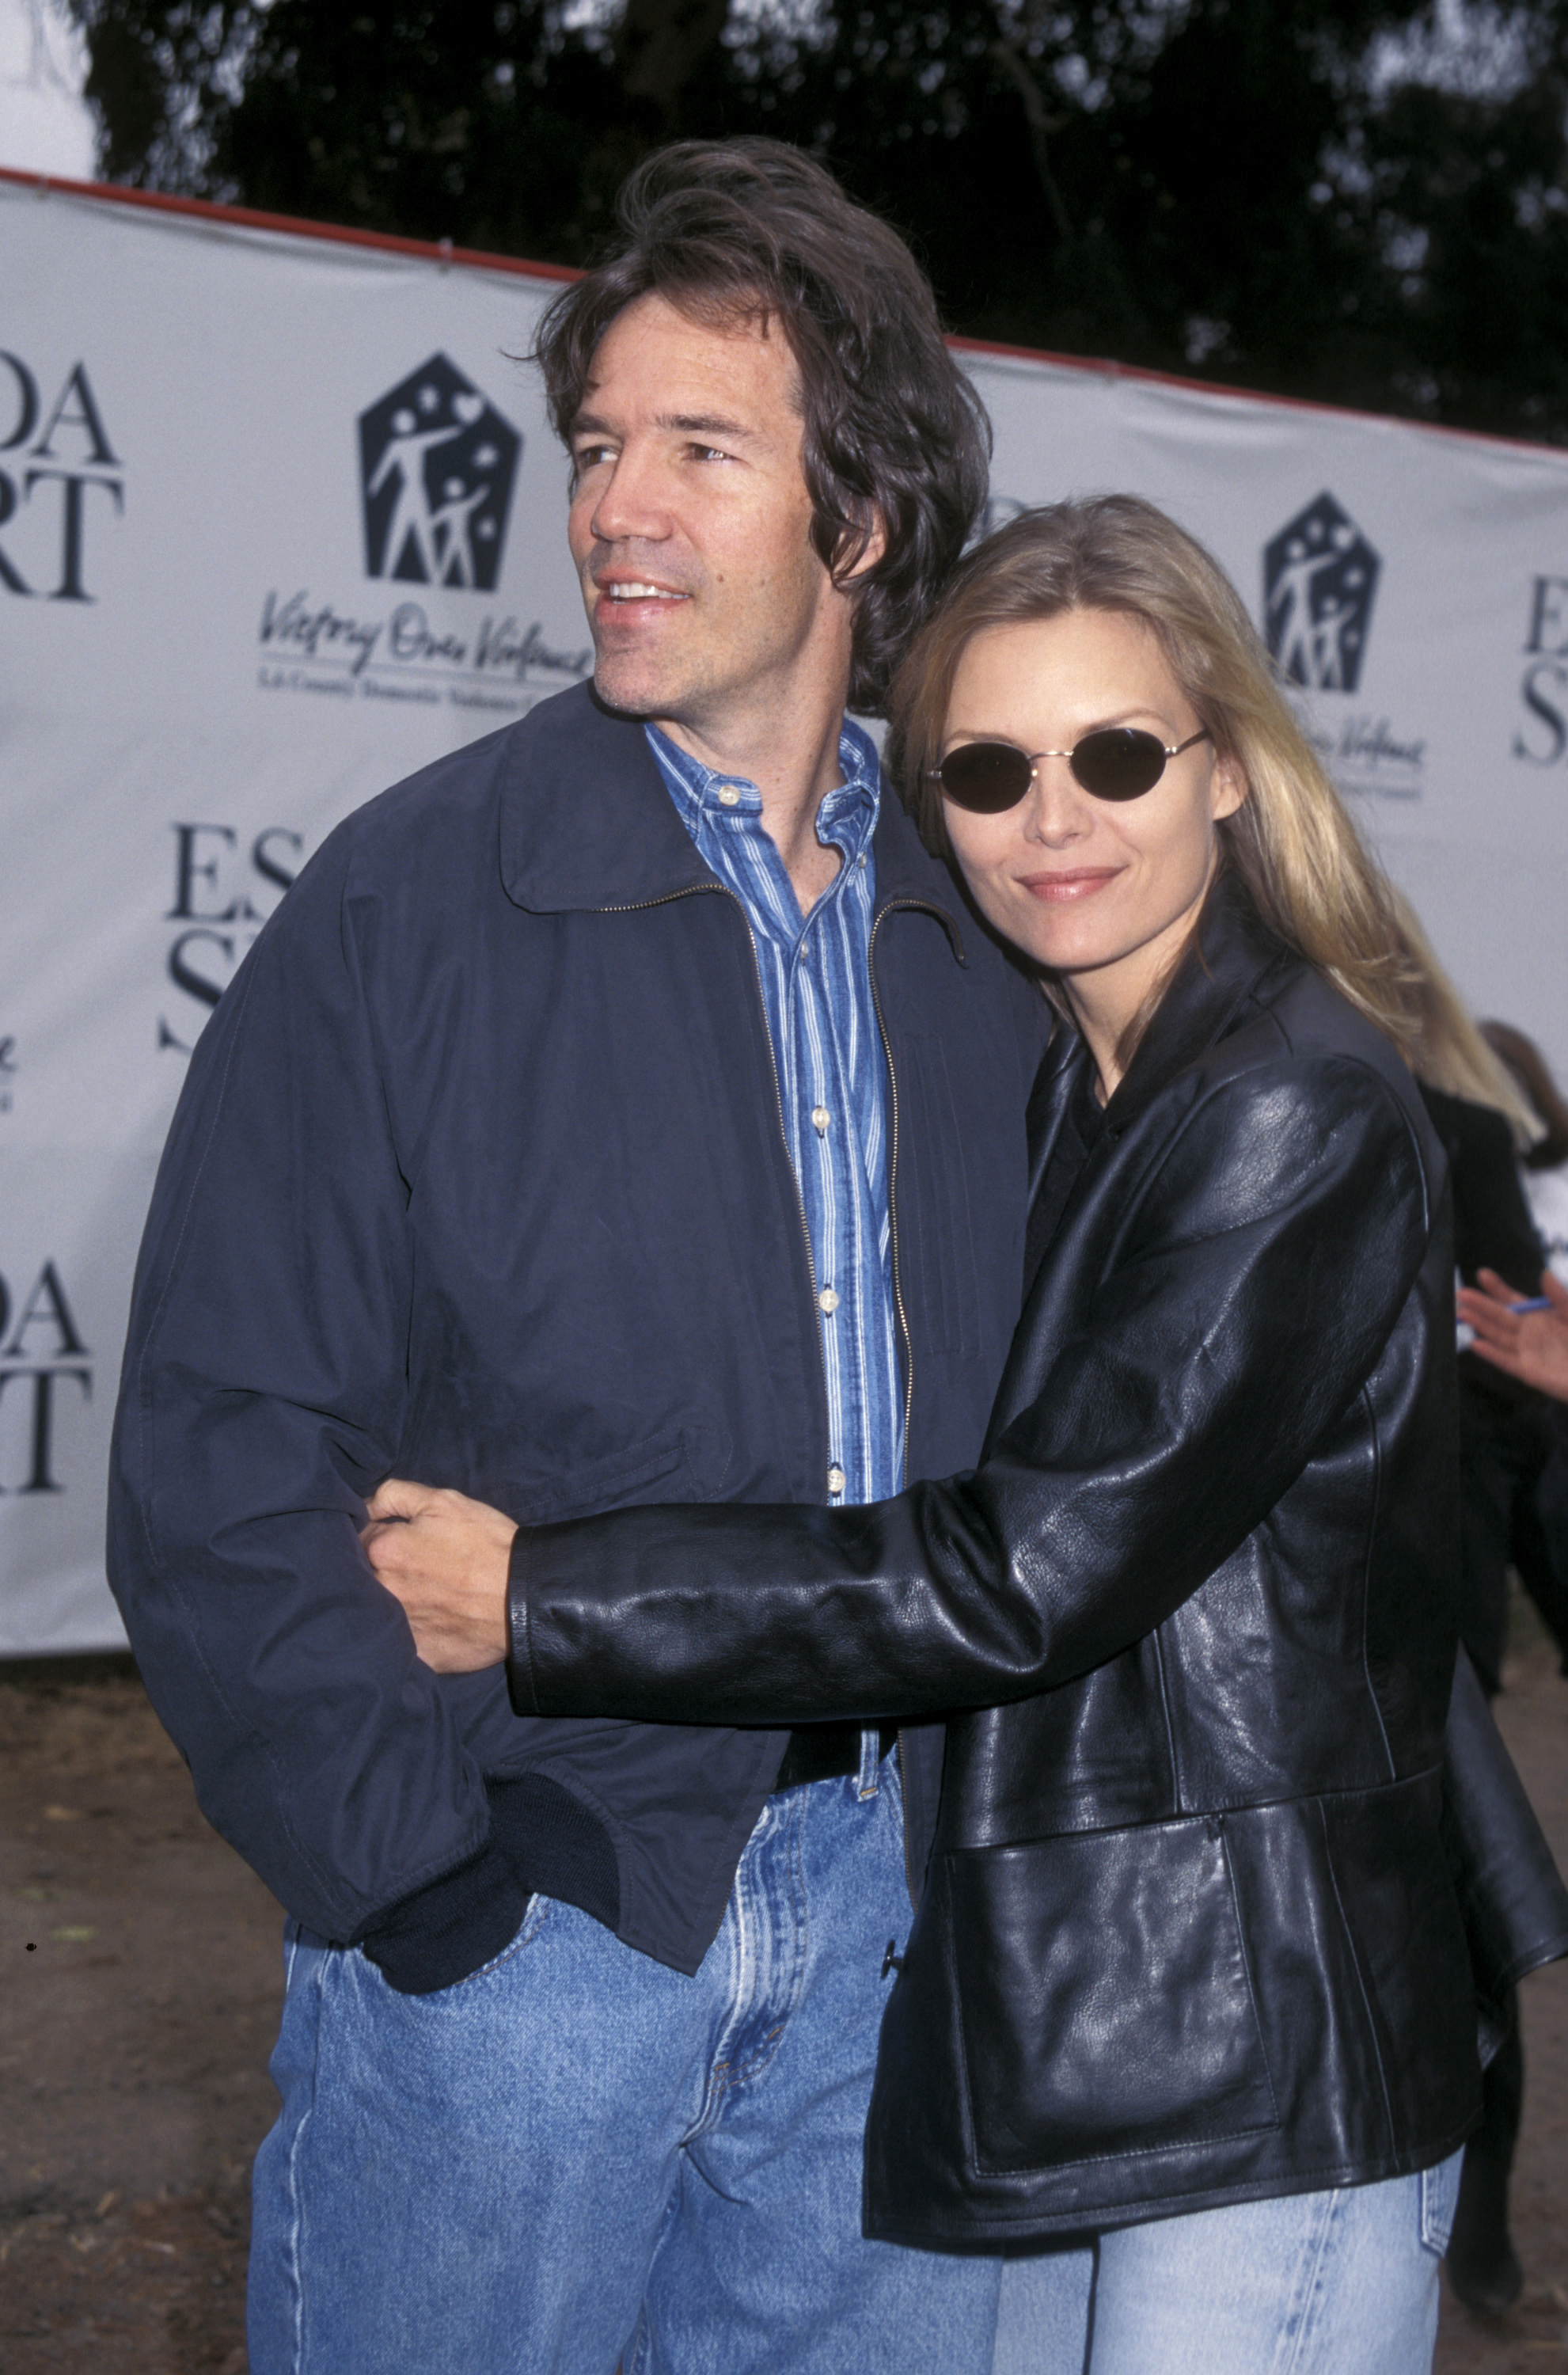 David E. Kelley and Michelle Pfeiffer during "Children at Play" for LA Battered Women's Shelters on November 17, 1996, in Pacific Palisades, California | Source: Getty Images